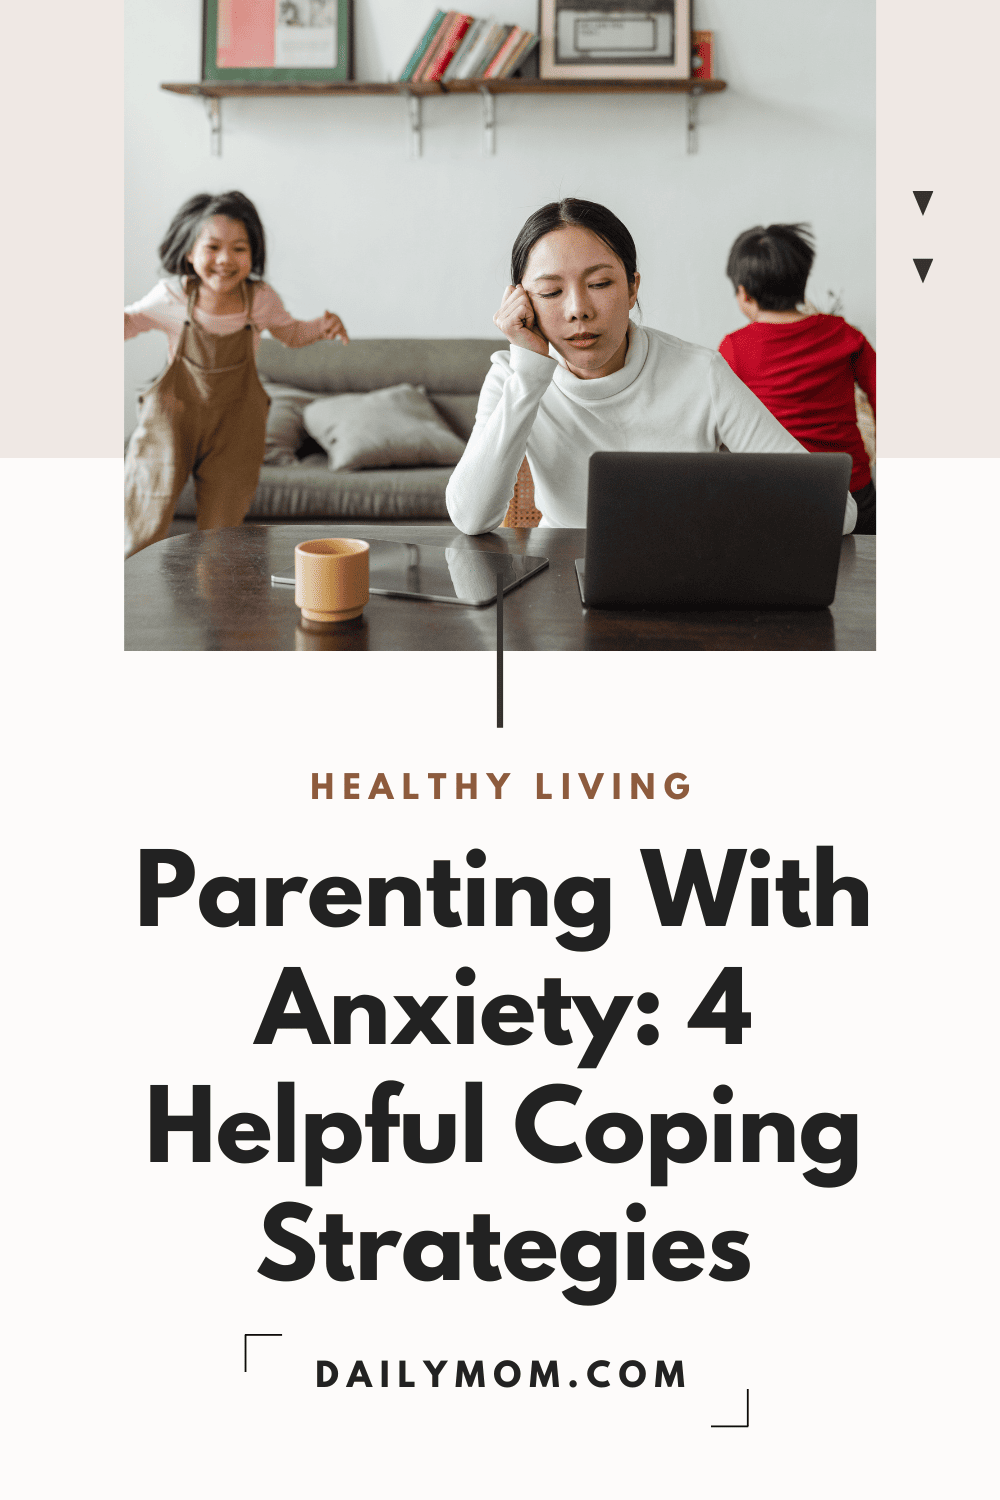 Daily-Mom-Parenting-With-Anxiety